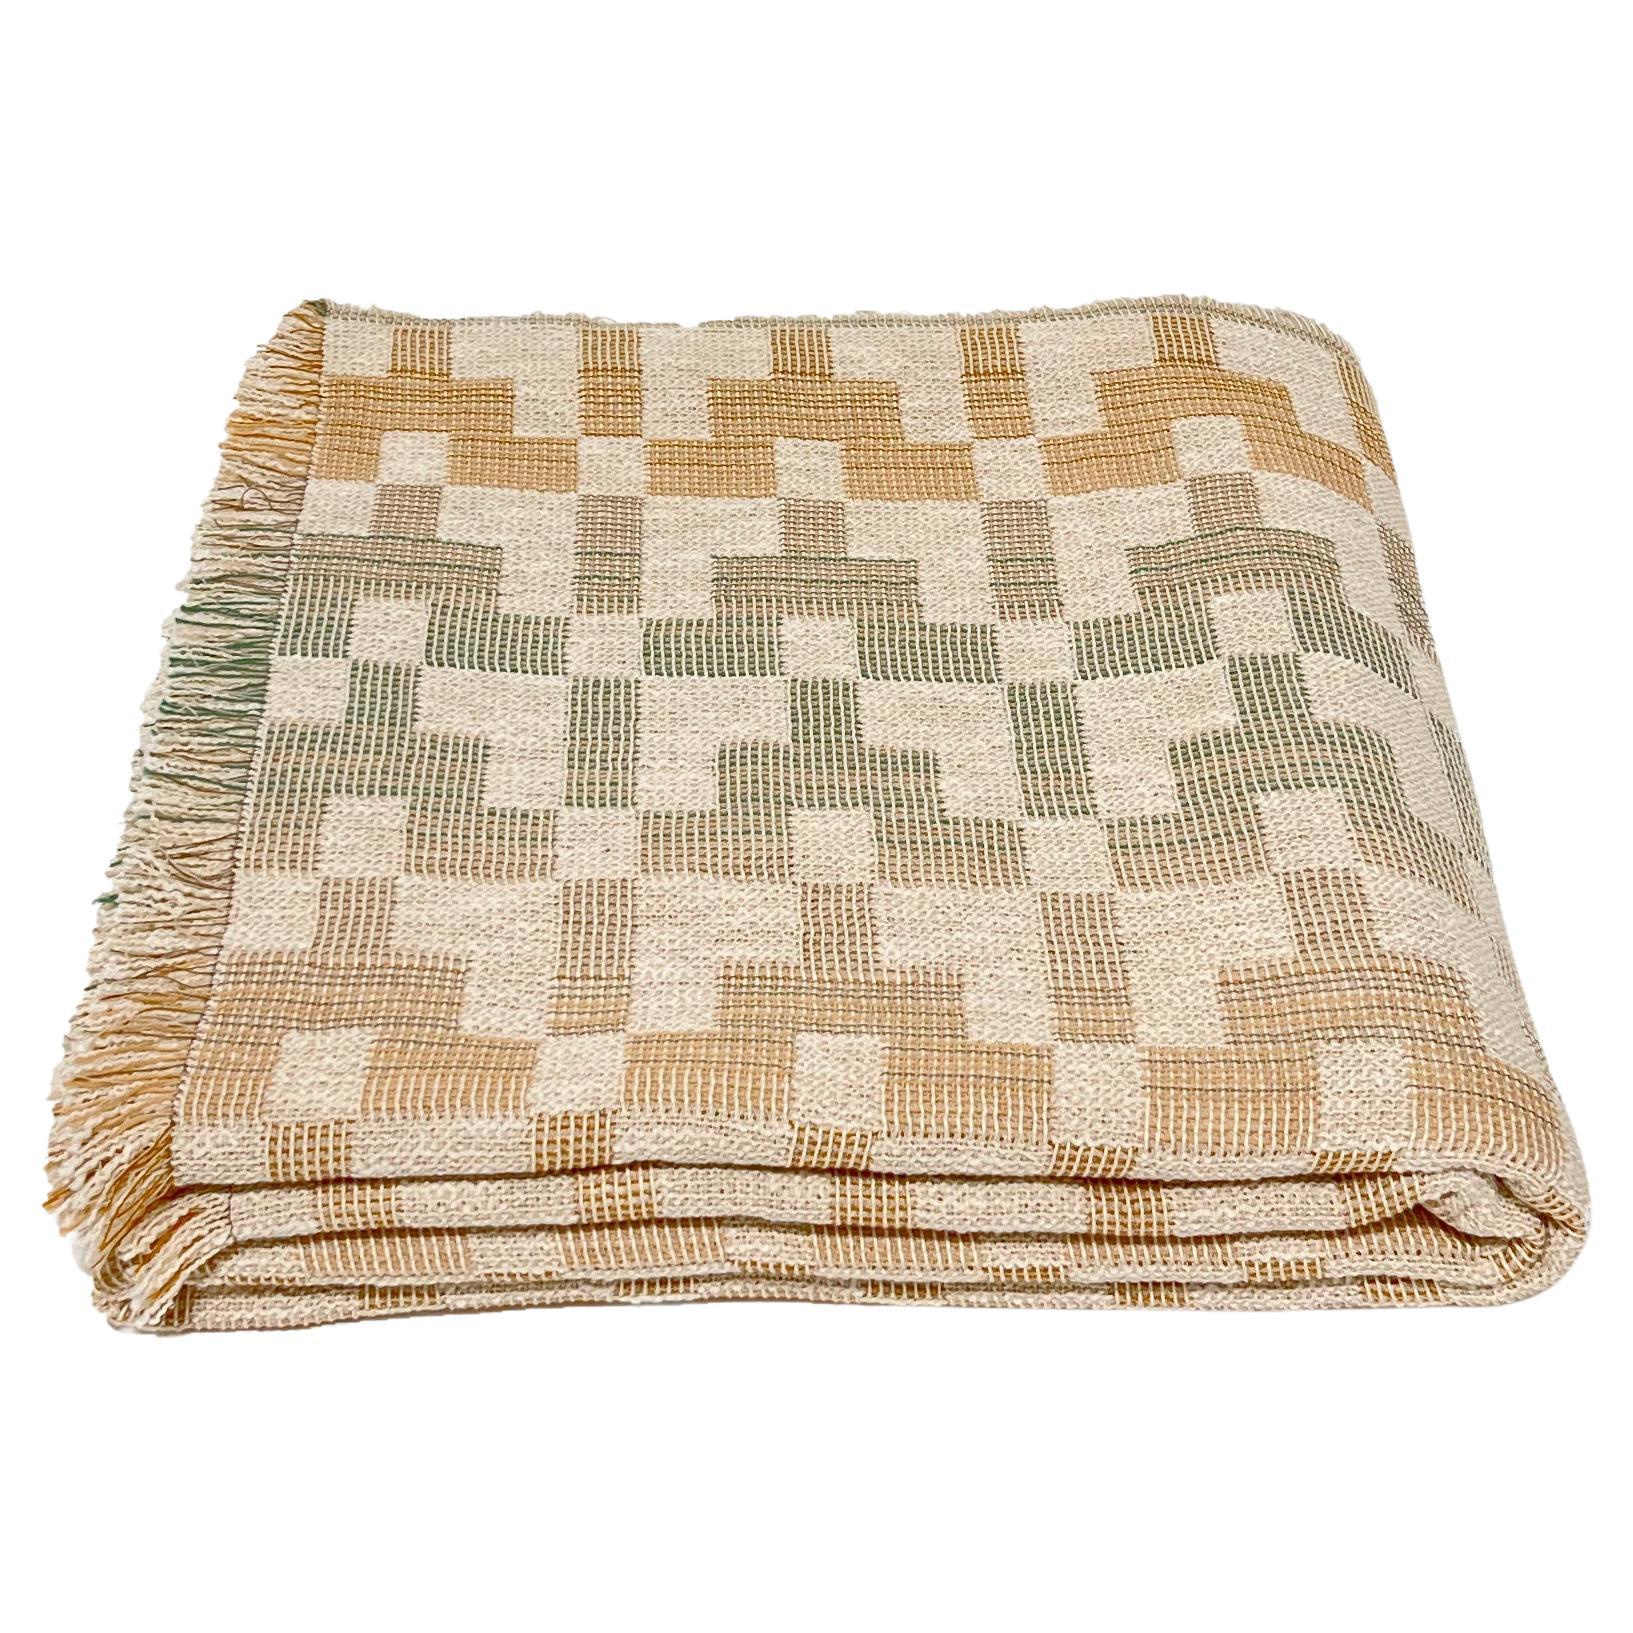 Patterned Woven Cotton Bedspread by Folk Textiles (Esme / Fade) For Sale